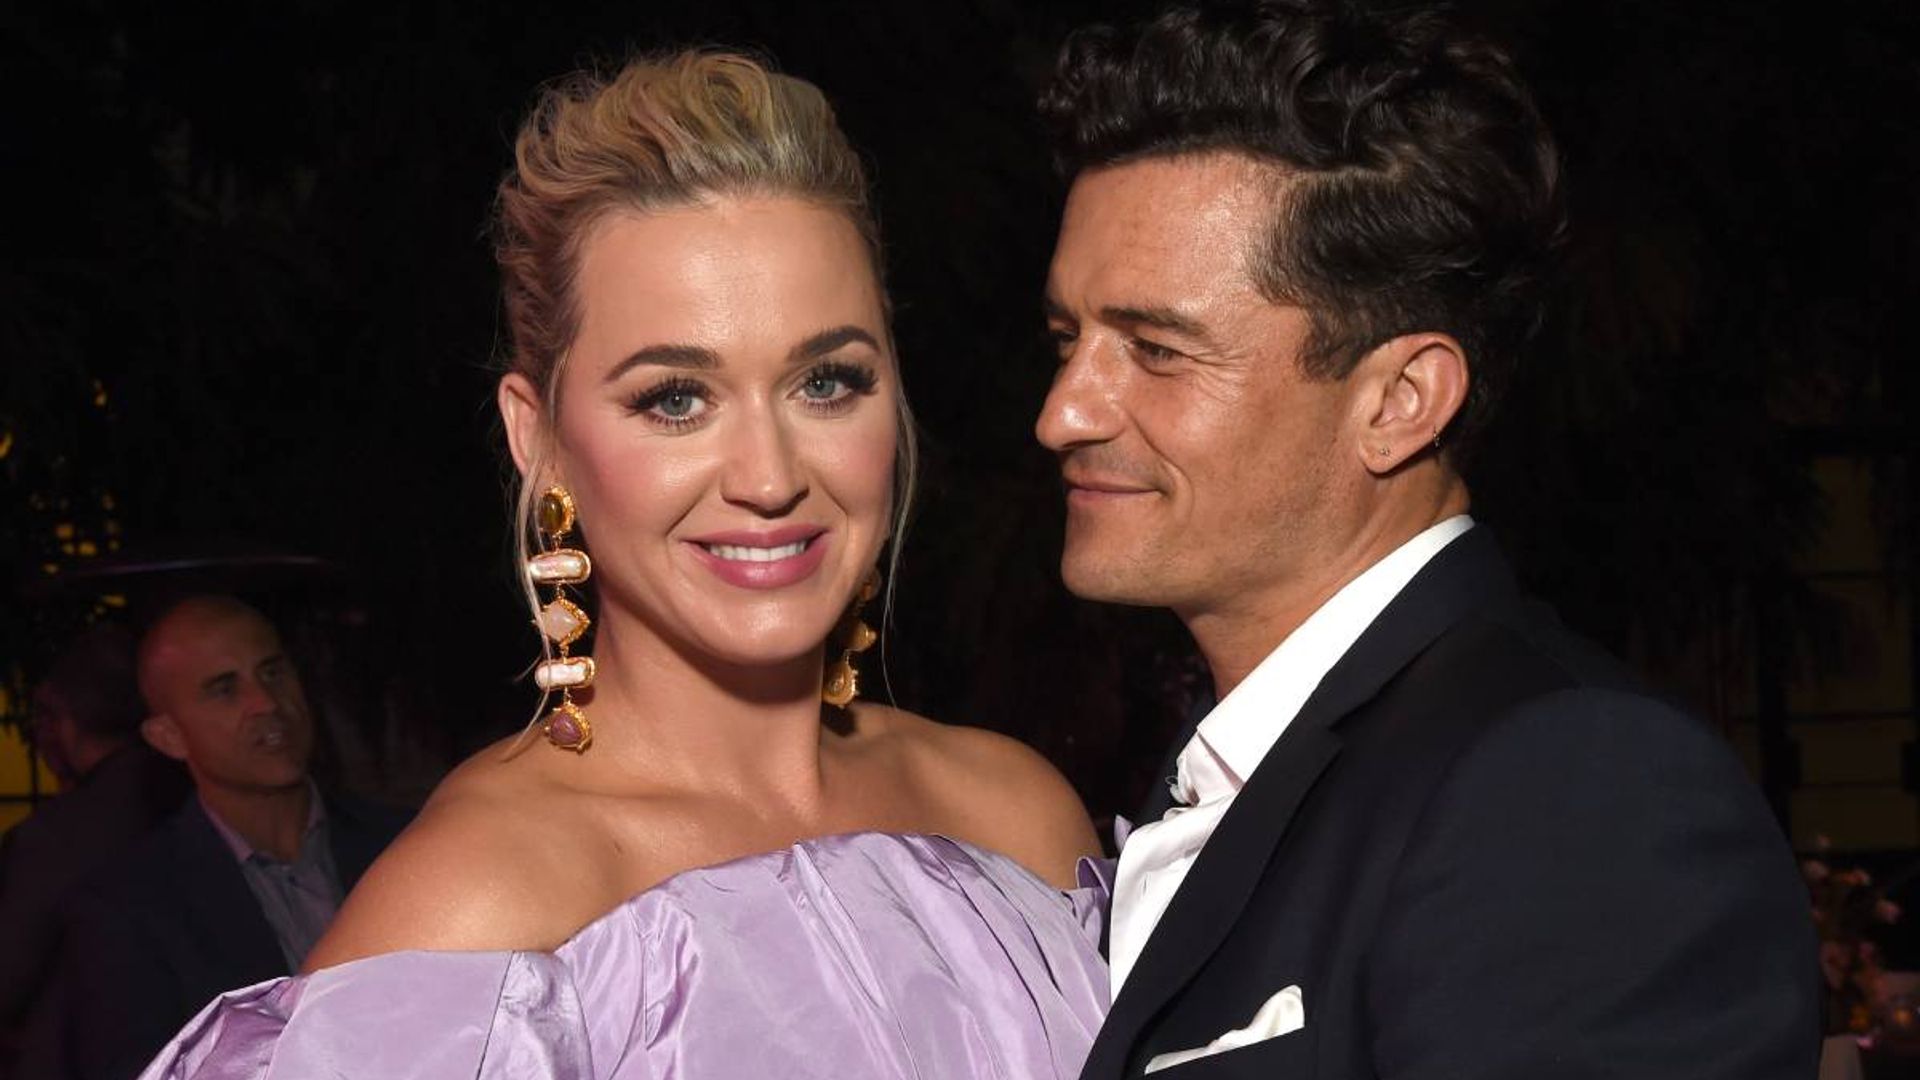 Katy Perry and Orlando Bloom mark double celebration on memorable day